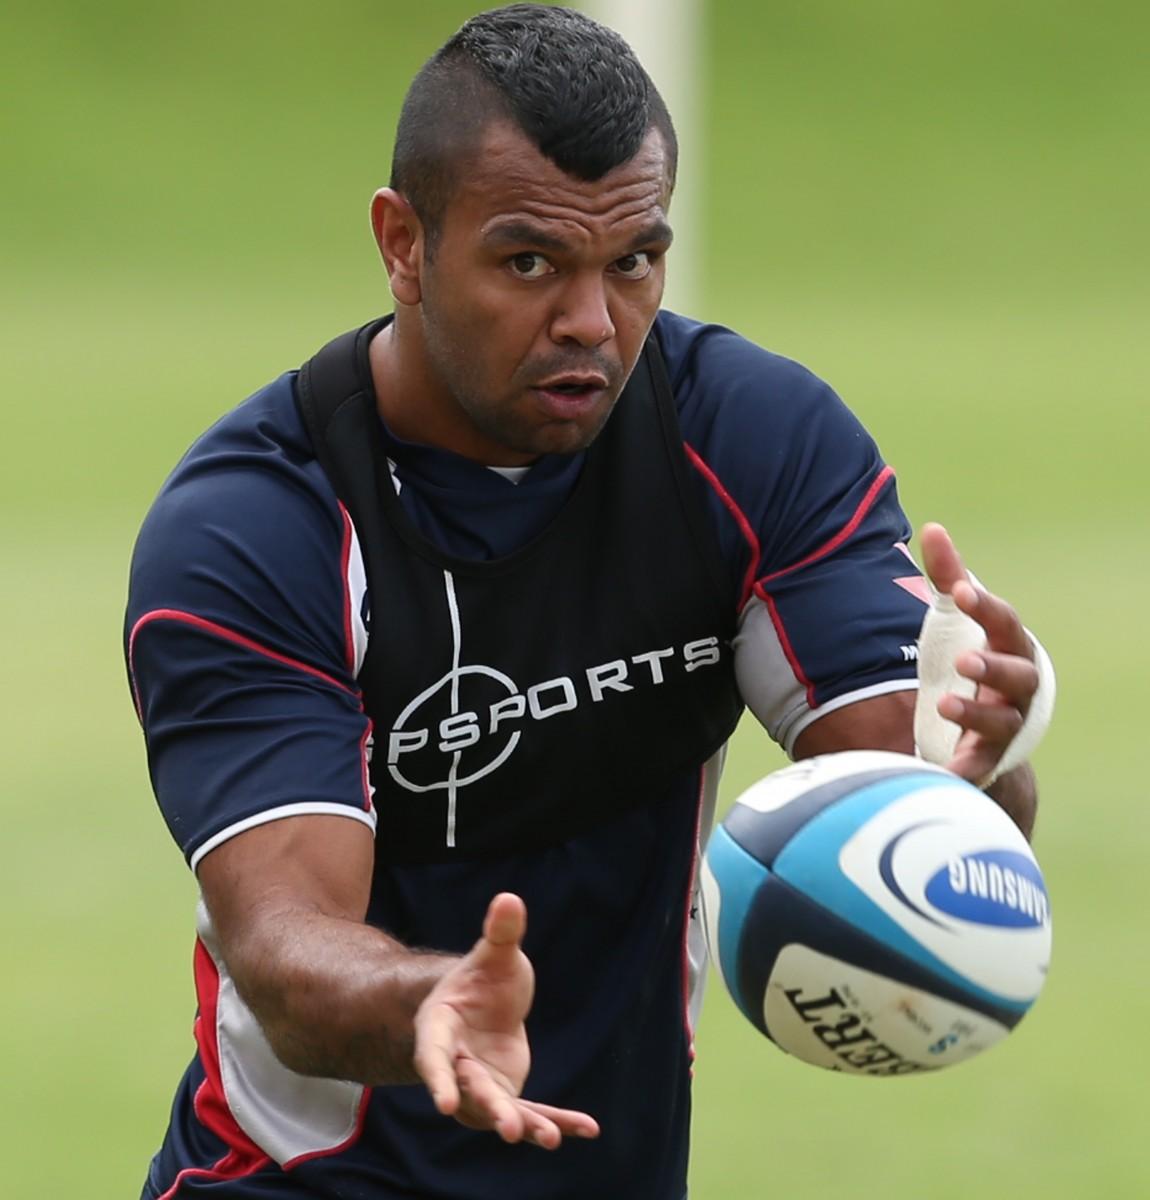 <a><img class="size-large wp-image-1768396" title="Melbourne Rebels Super Rugby Training Session" src="https://www.theepochtimes.com/assets/uploads/2015/09/146.rugby_.beale_.passes.164128391.jpg" alt="" width="565" height="590"/></a>